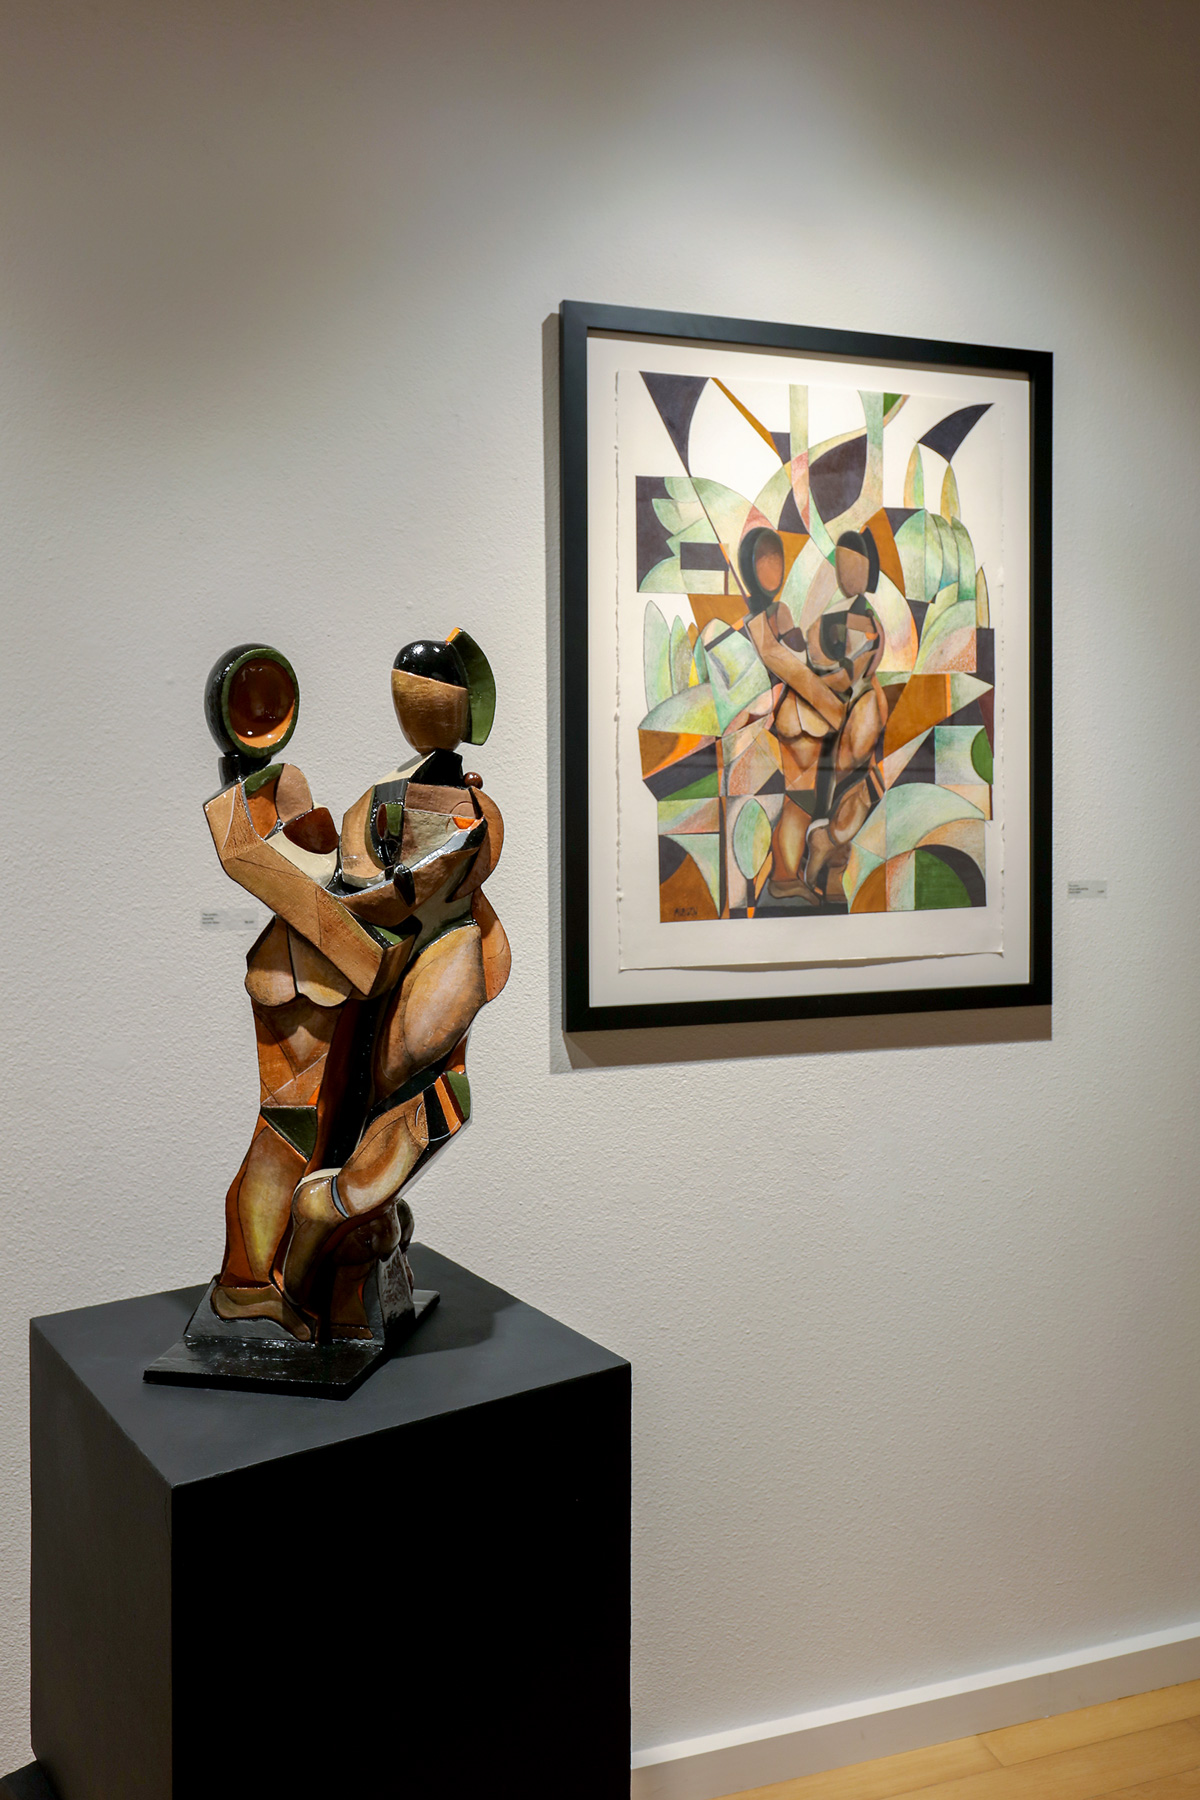 Paintings and sculpture from international artists in exhibit at Moberg Gallery